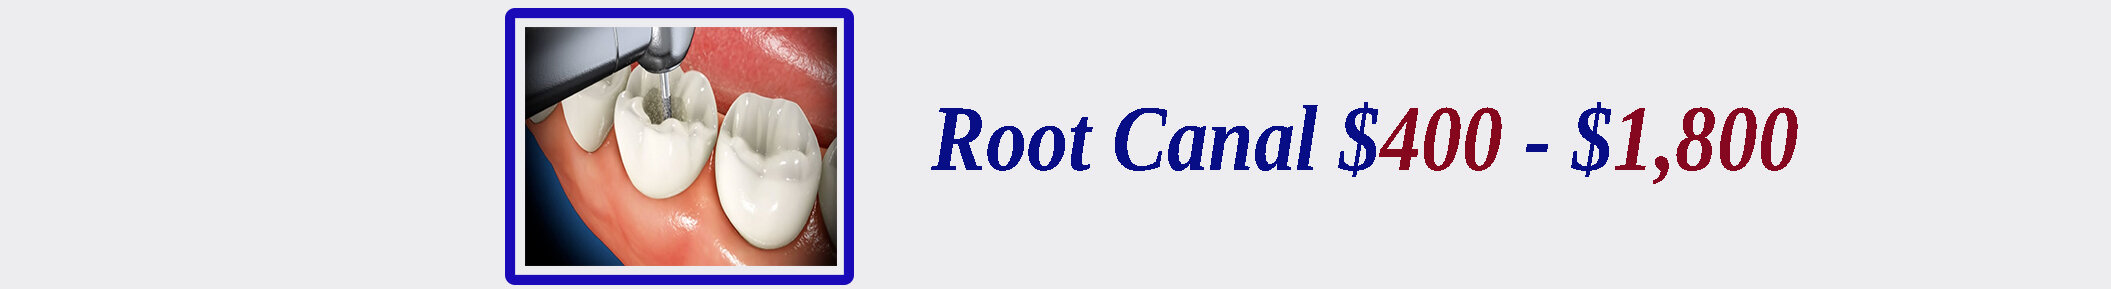 root-canal.jpg